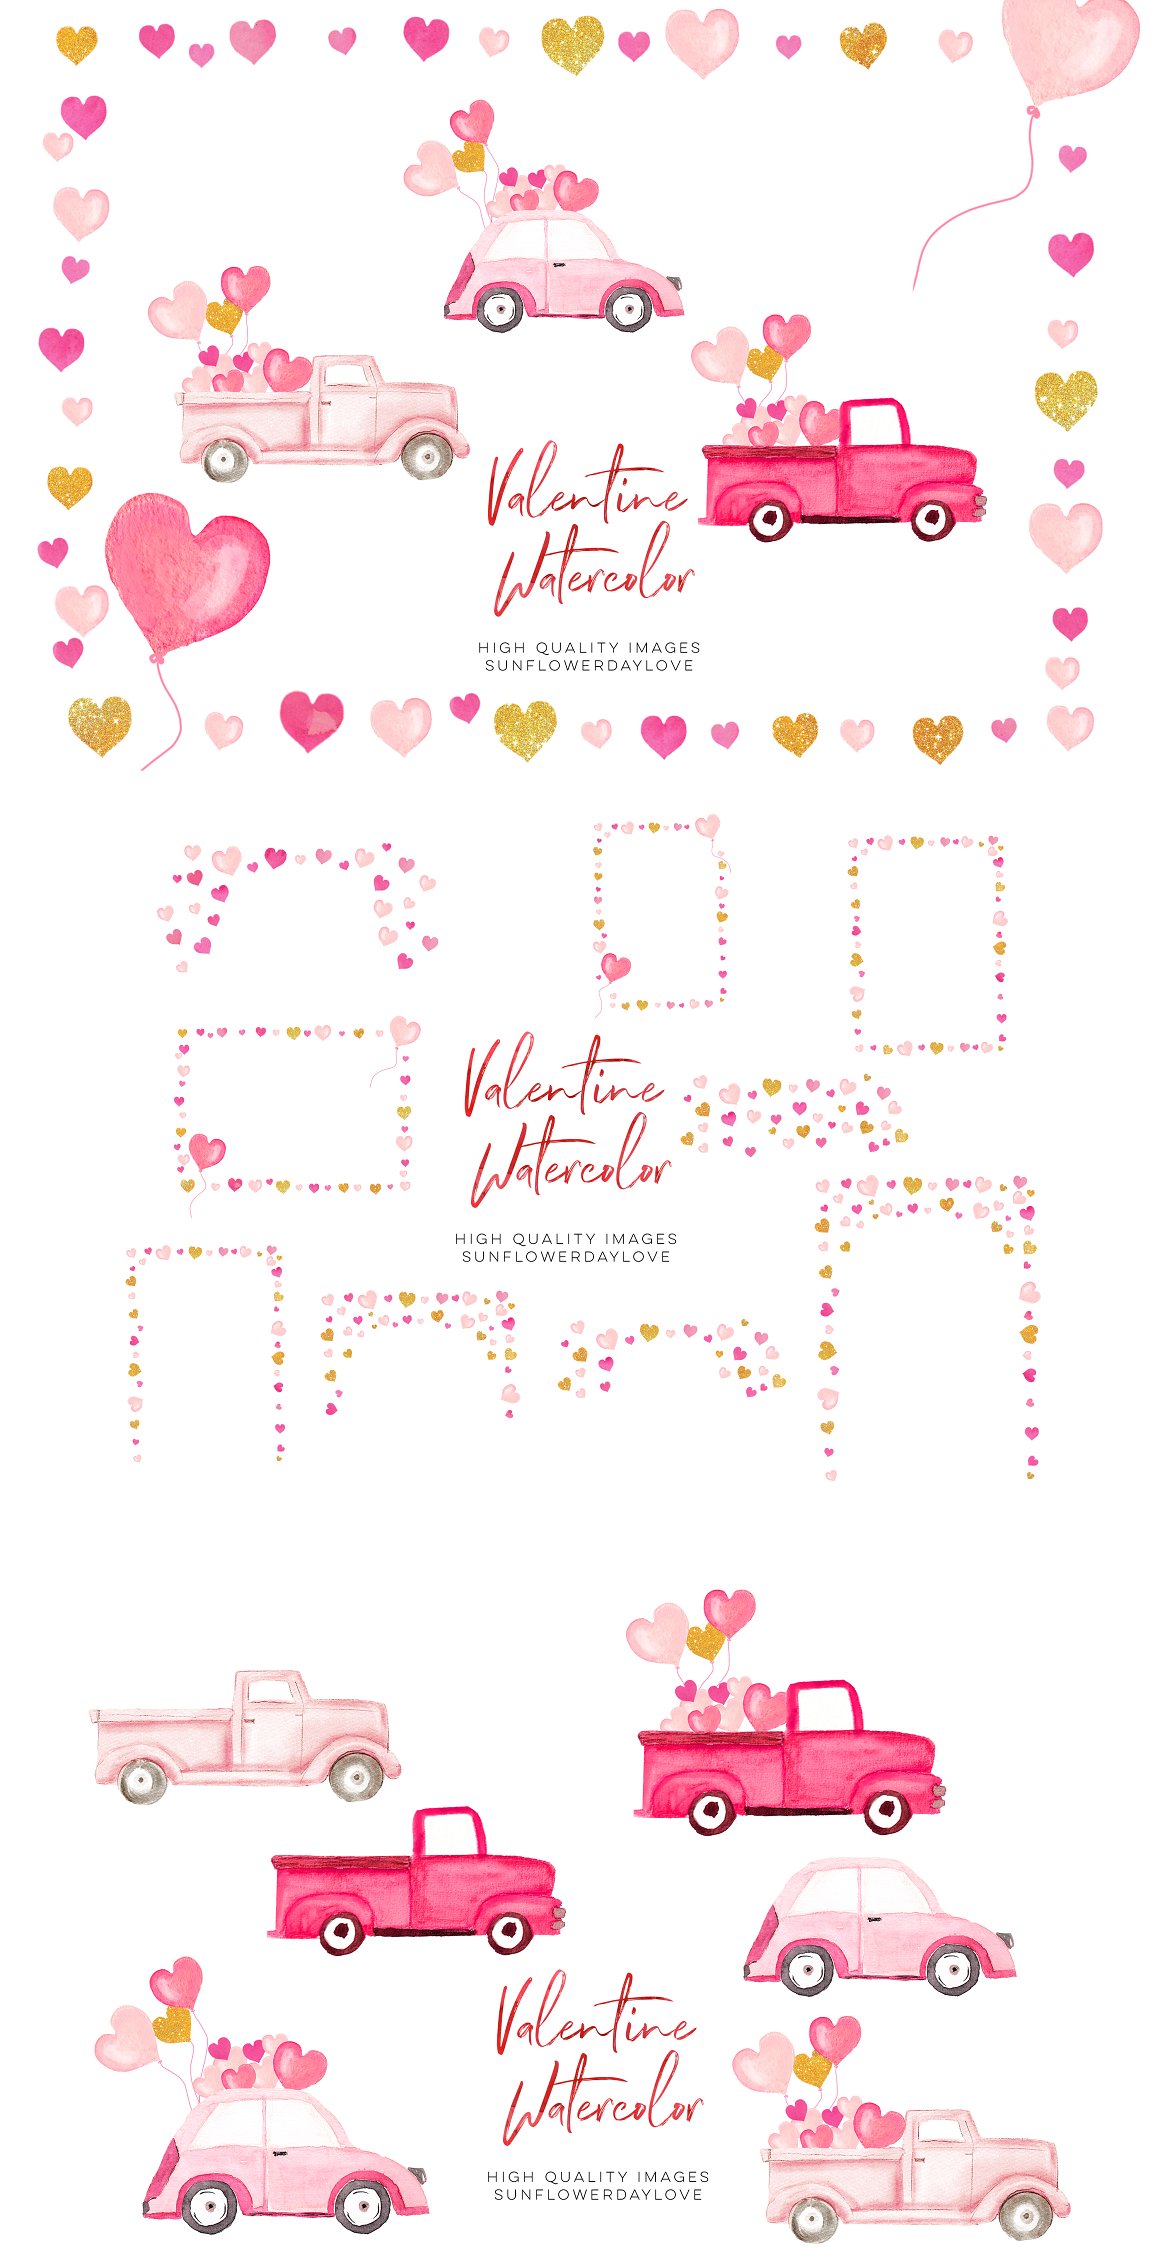 3 covers - pink lettering "Valentine Watercolor" and different frames of hearts, and pink cars with heart balloons on a white background.